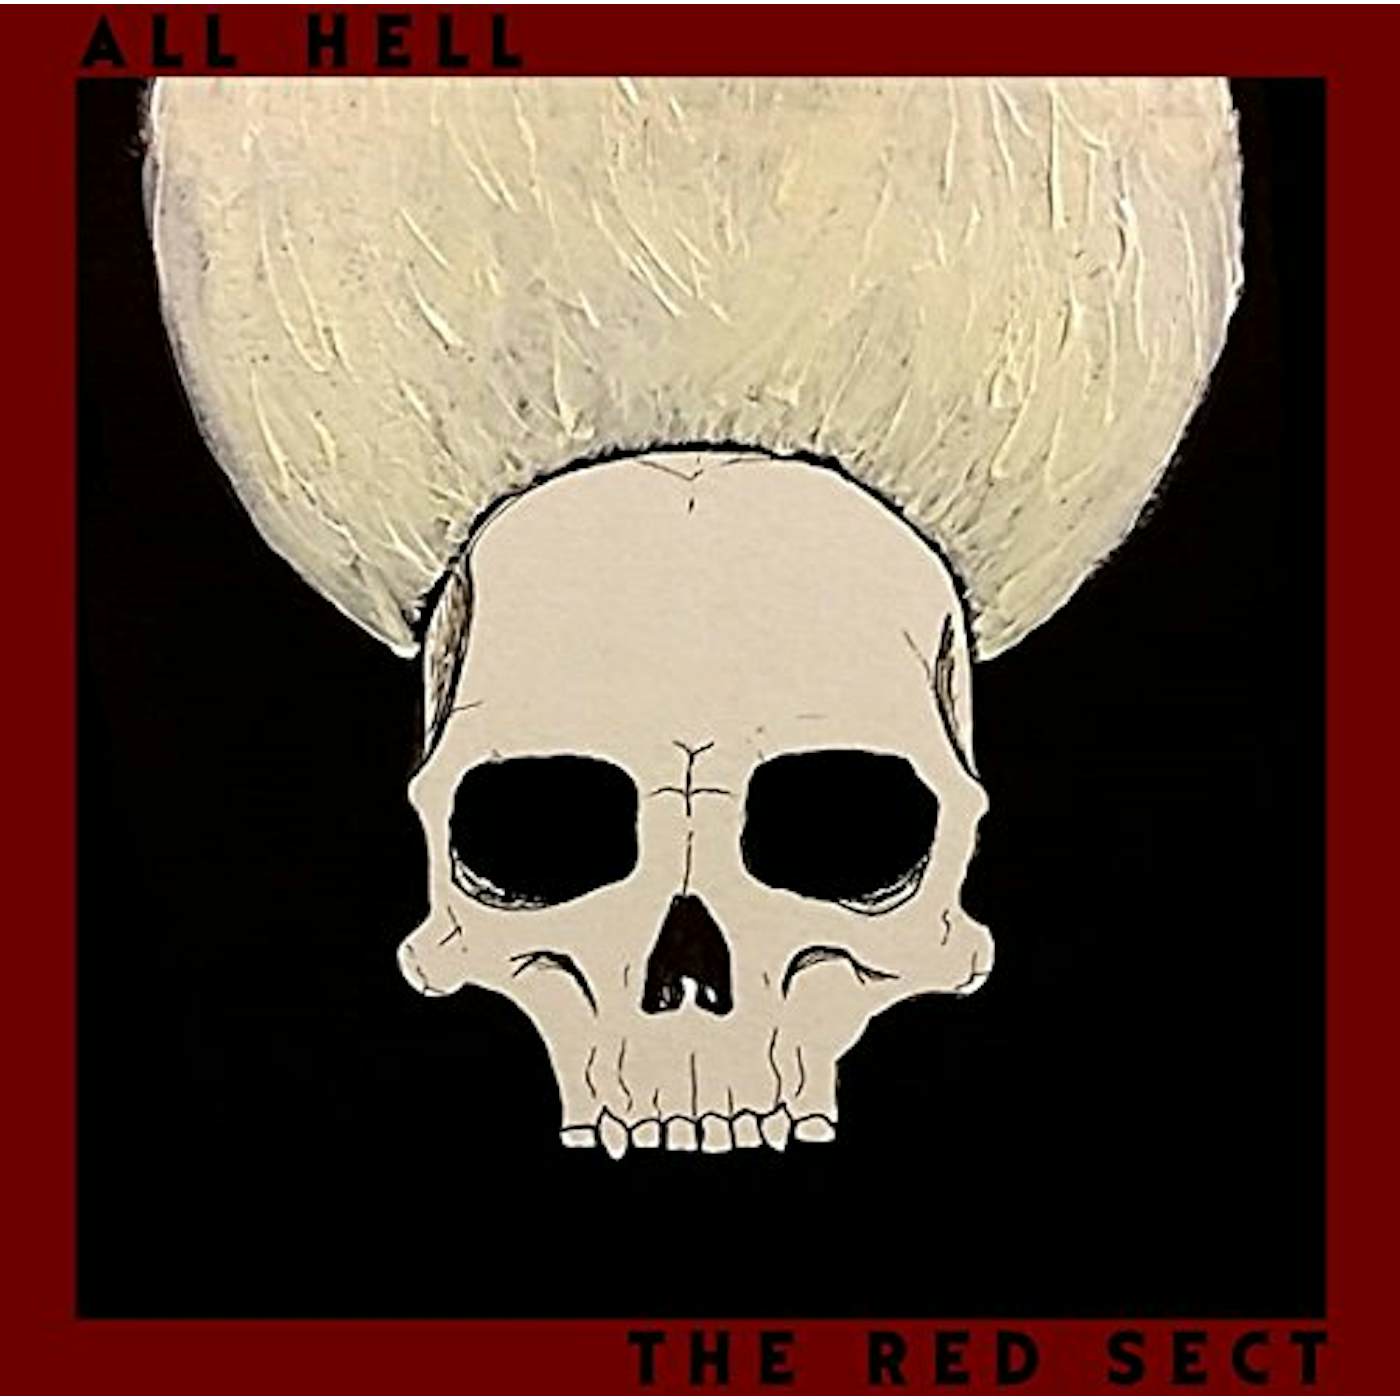 All Hell RED SECT CD